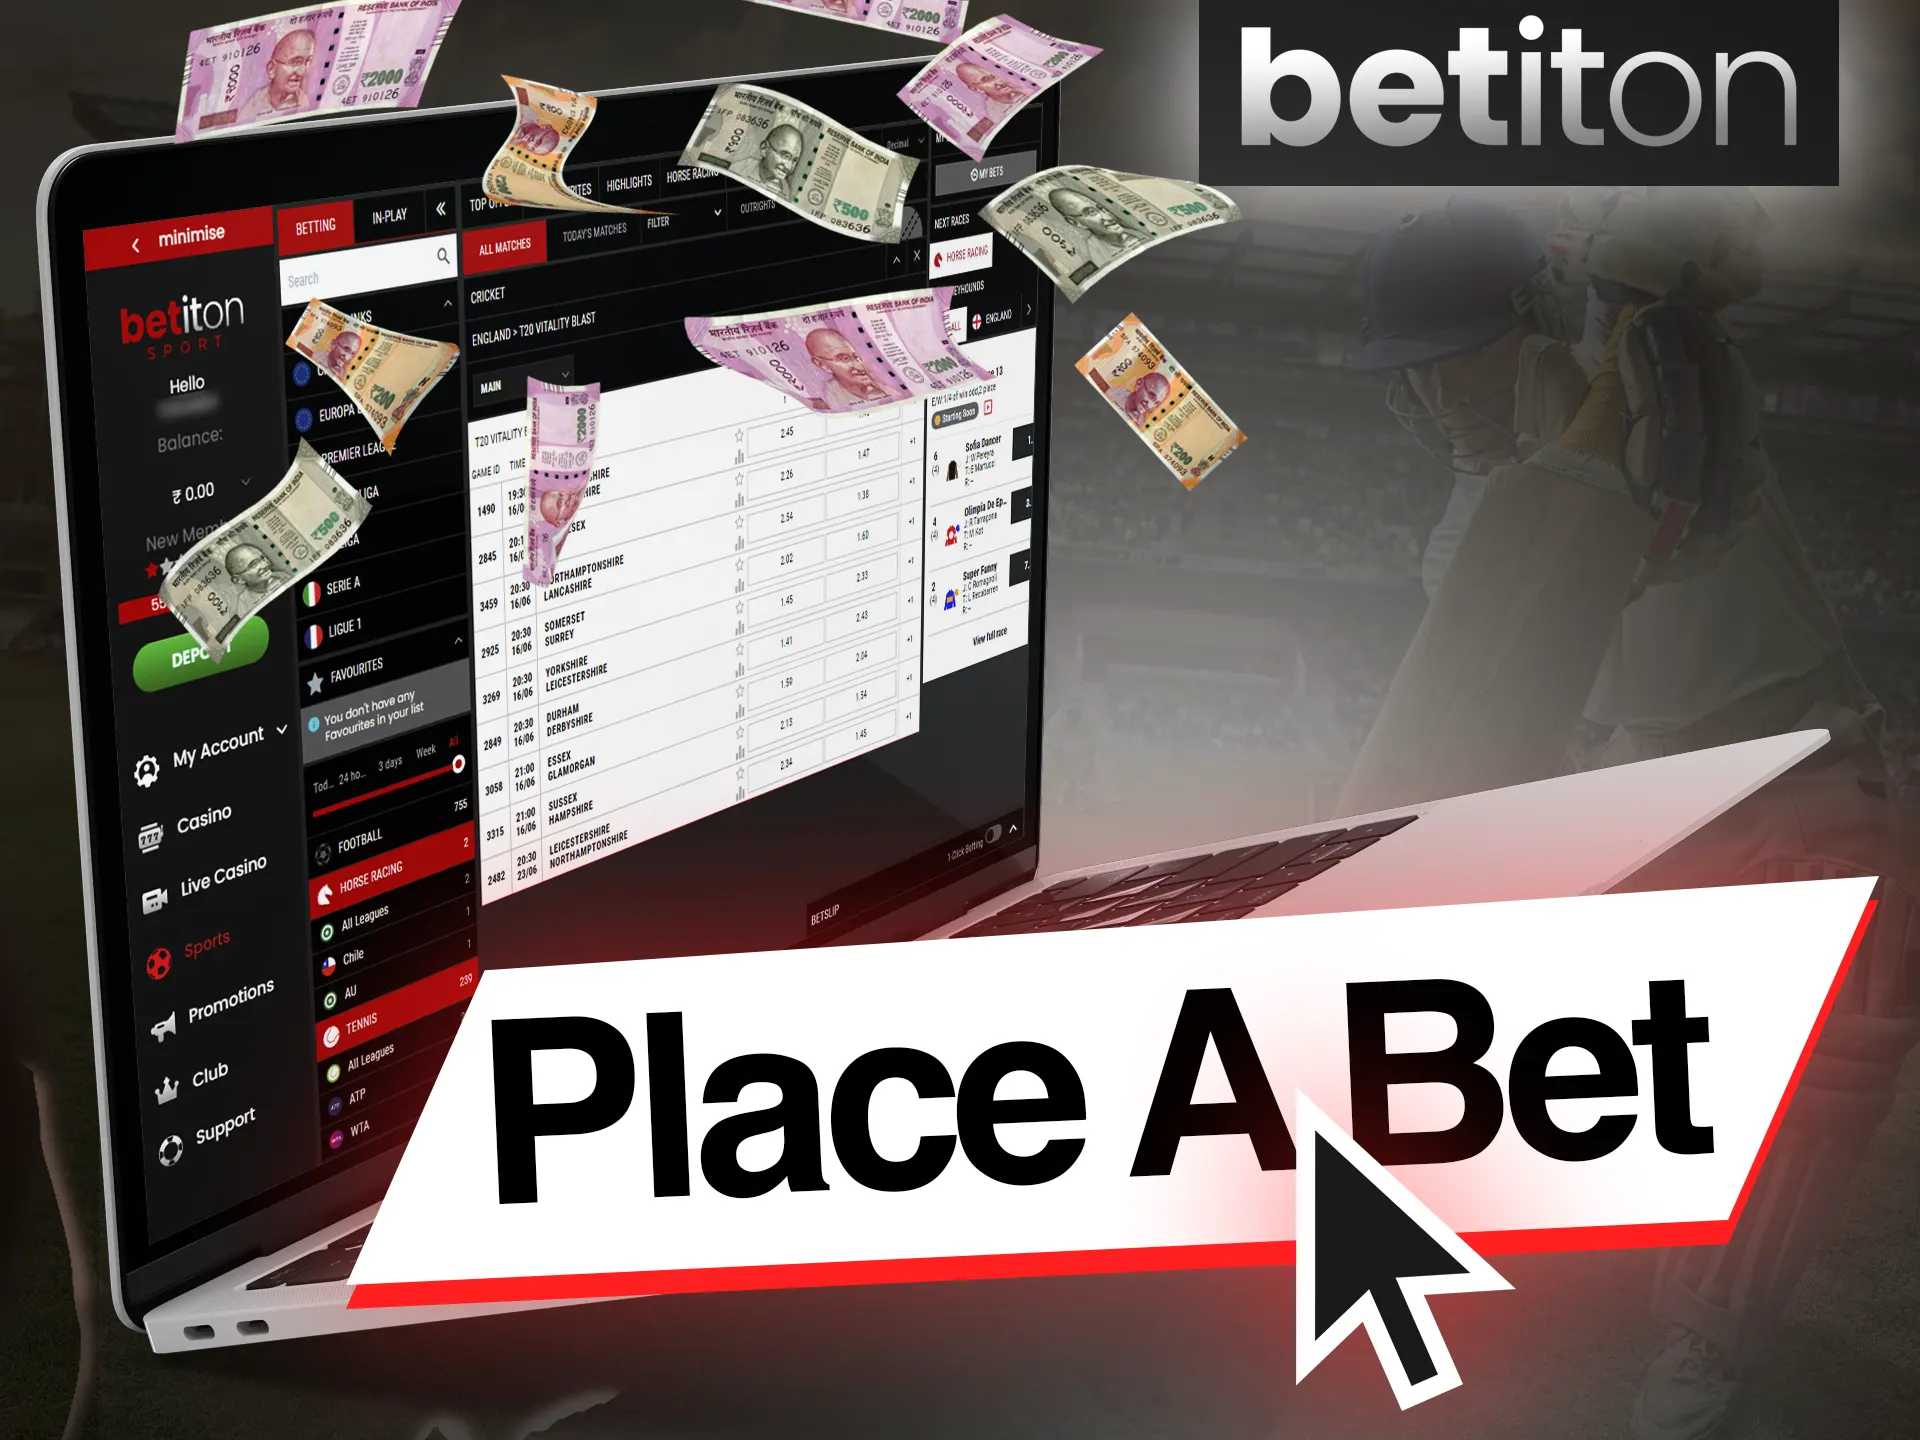 Place bets on sports easily on the Betiton sports page.